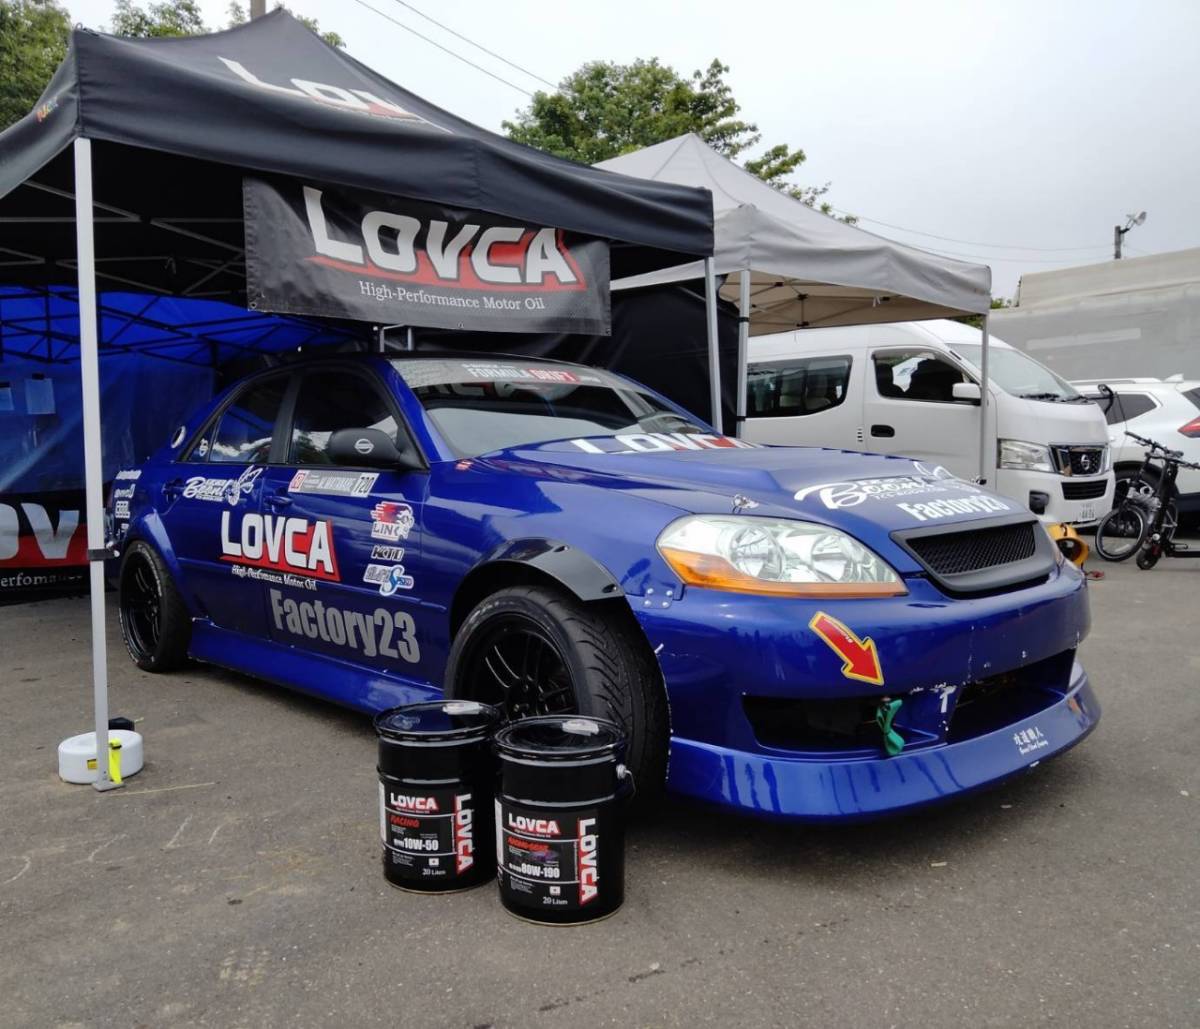 # free shipping #LOVCA SPORT 10W-40 20L SN MA2#lipi-ta coming out one after another!2 wheel 4 wheel combined use engine oil 100% chemosynthesis oil PAO+VHVI made in Japan Rav ka#LS1040-20